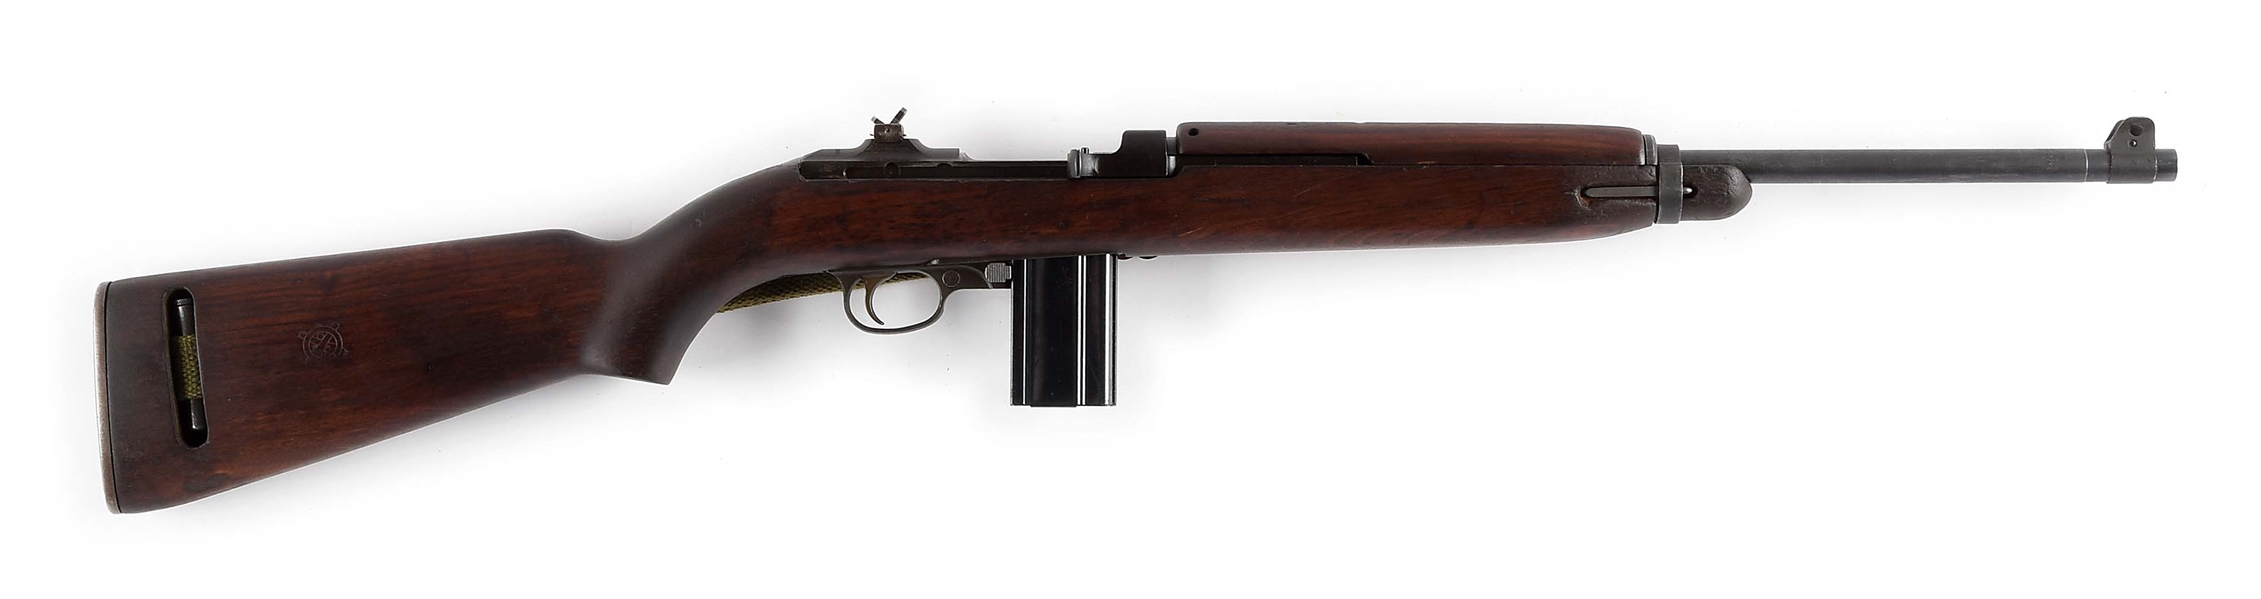 (C) ULTRA RARE NON-SERIAL NUMBERED INLAND M1 CARBINE.